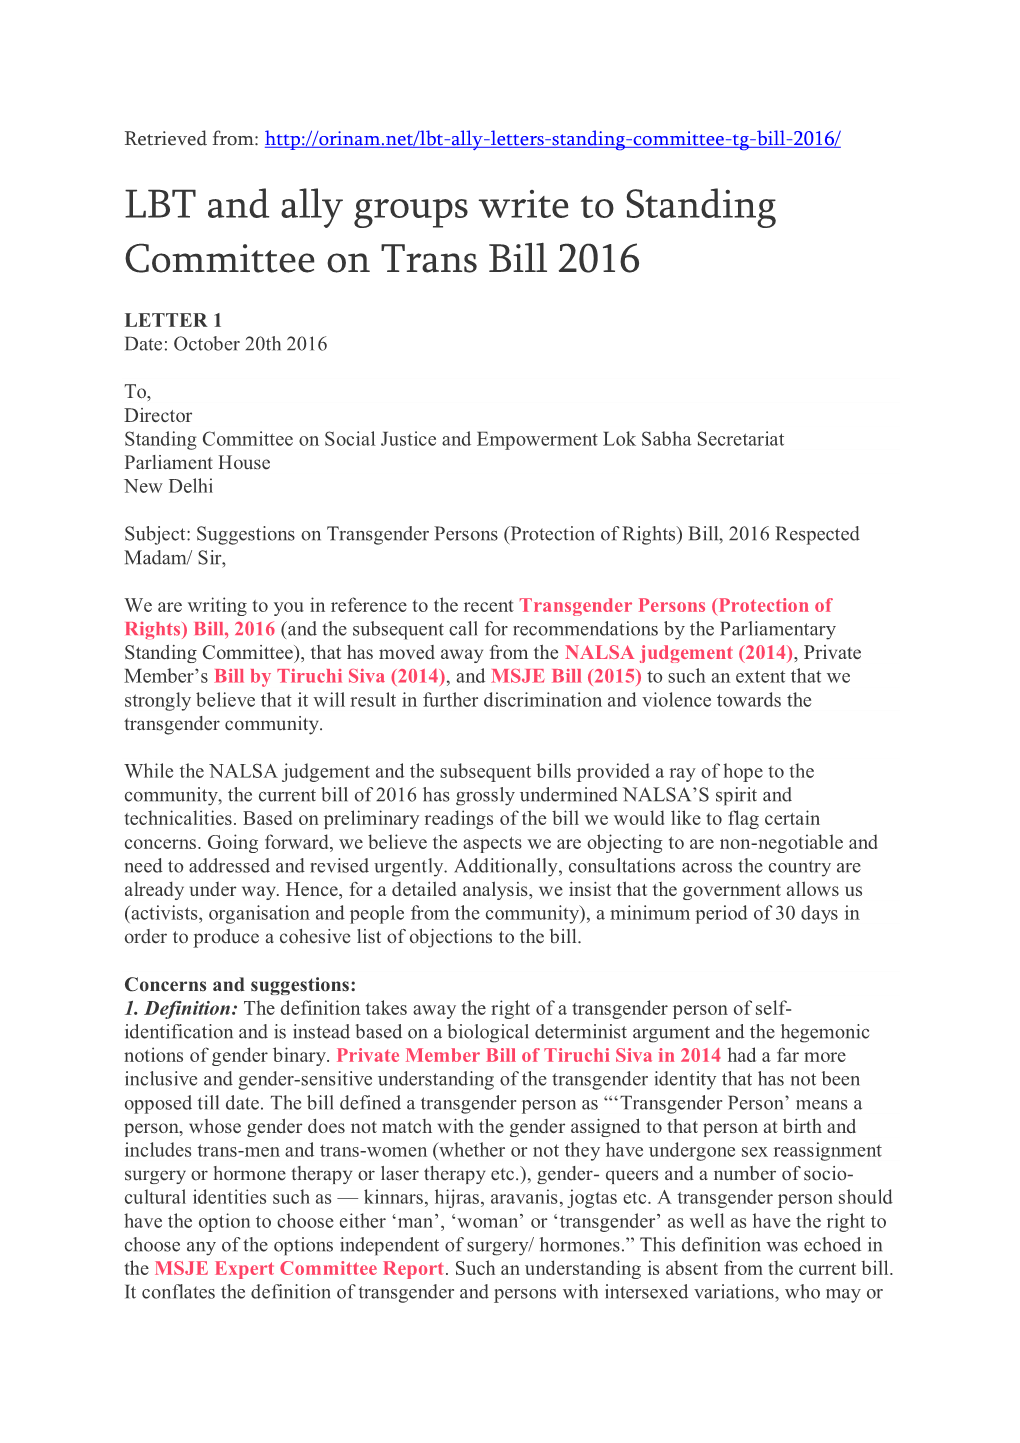 LBT and Ally Groups Write to Standing Committee on Trans Bill 2016